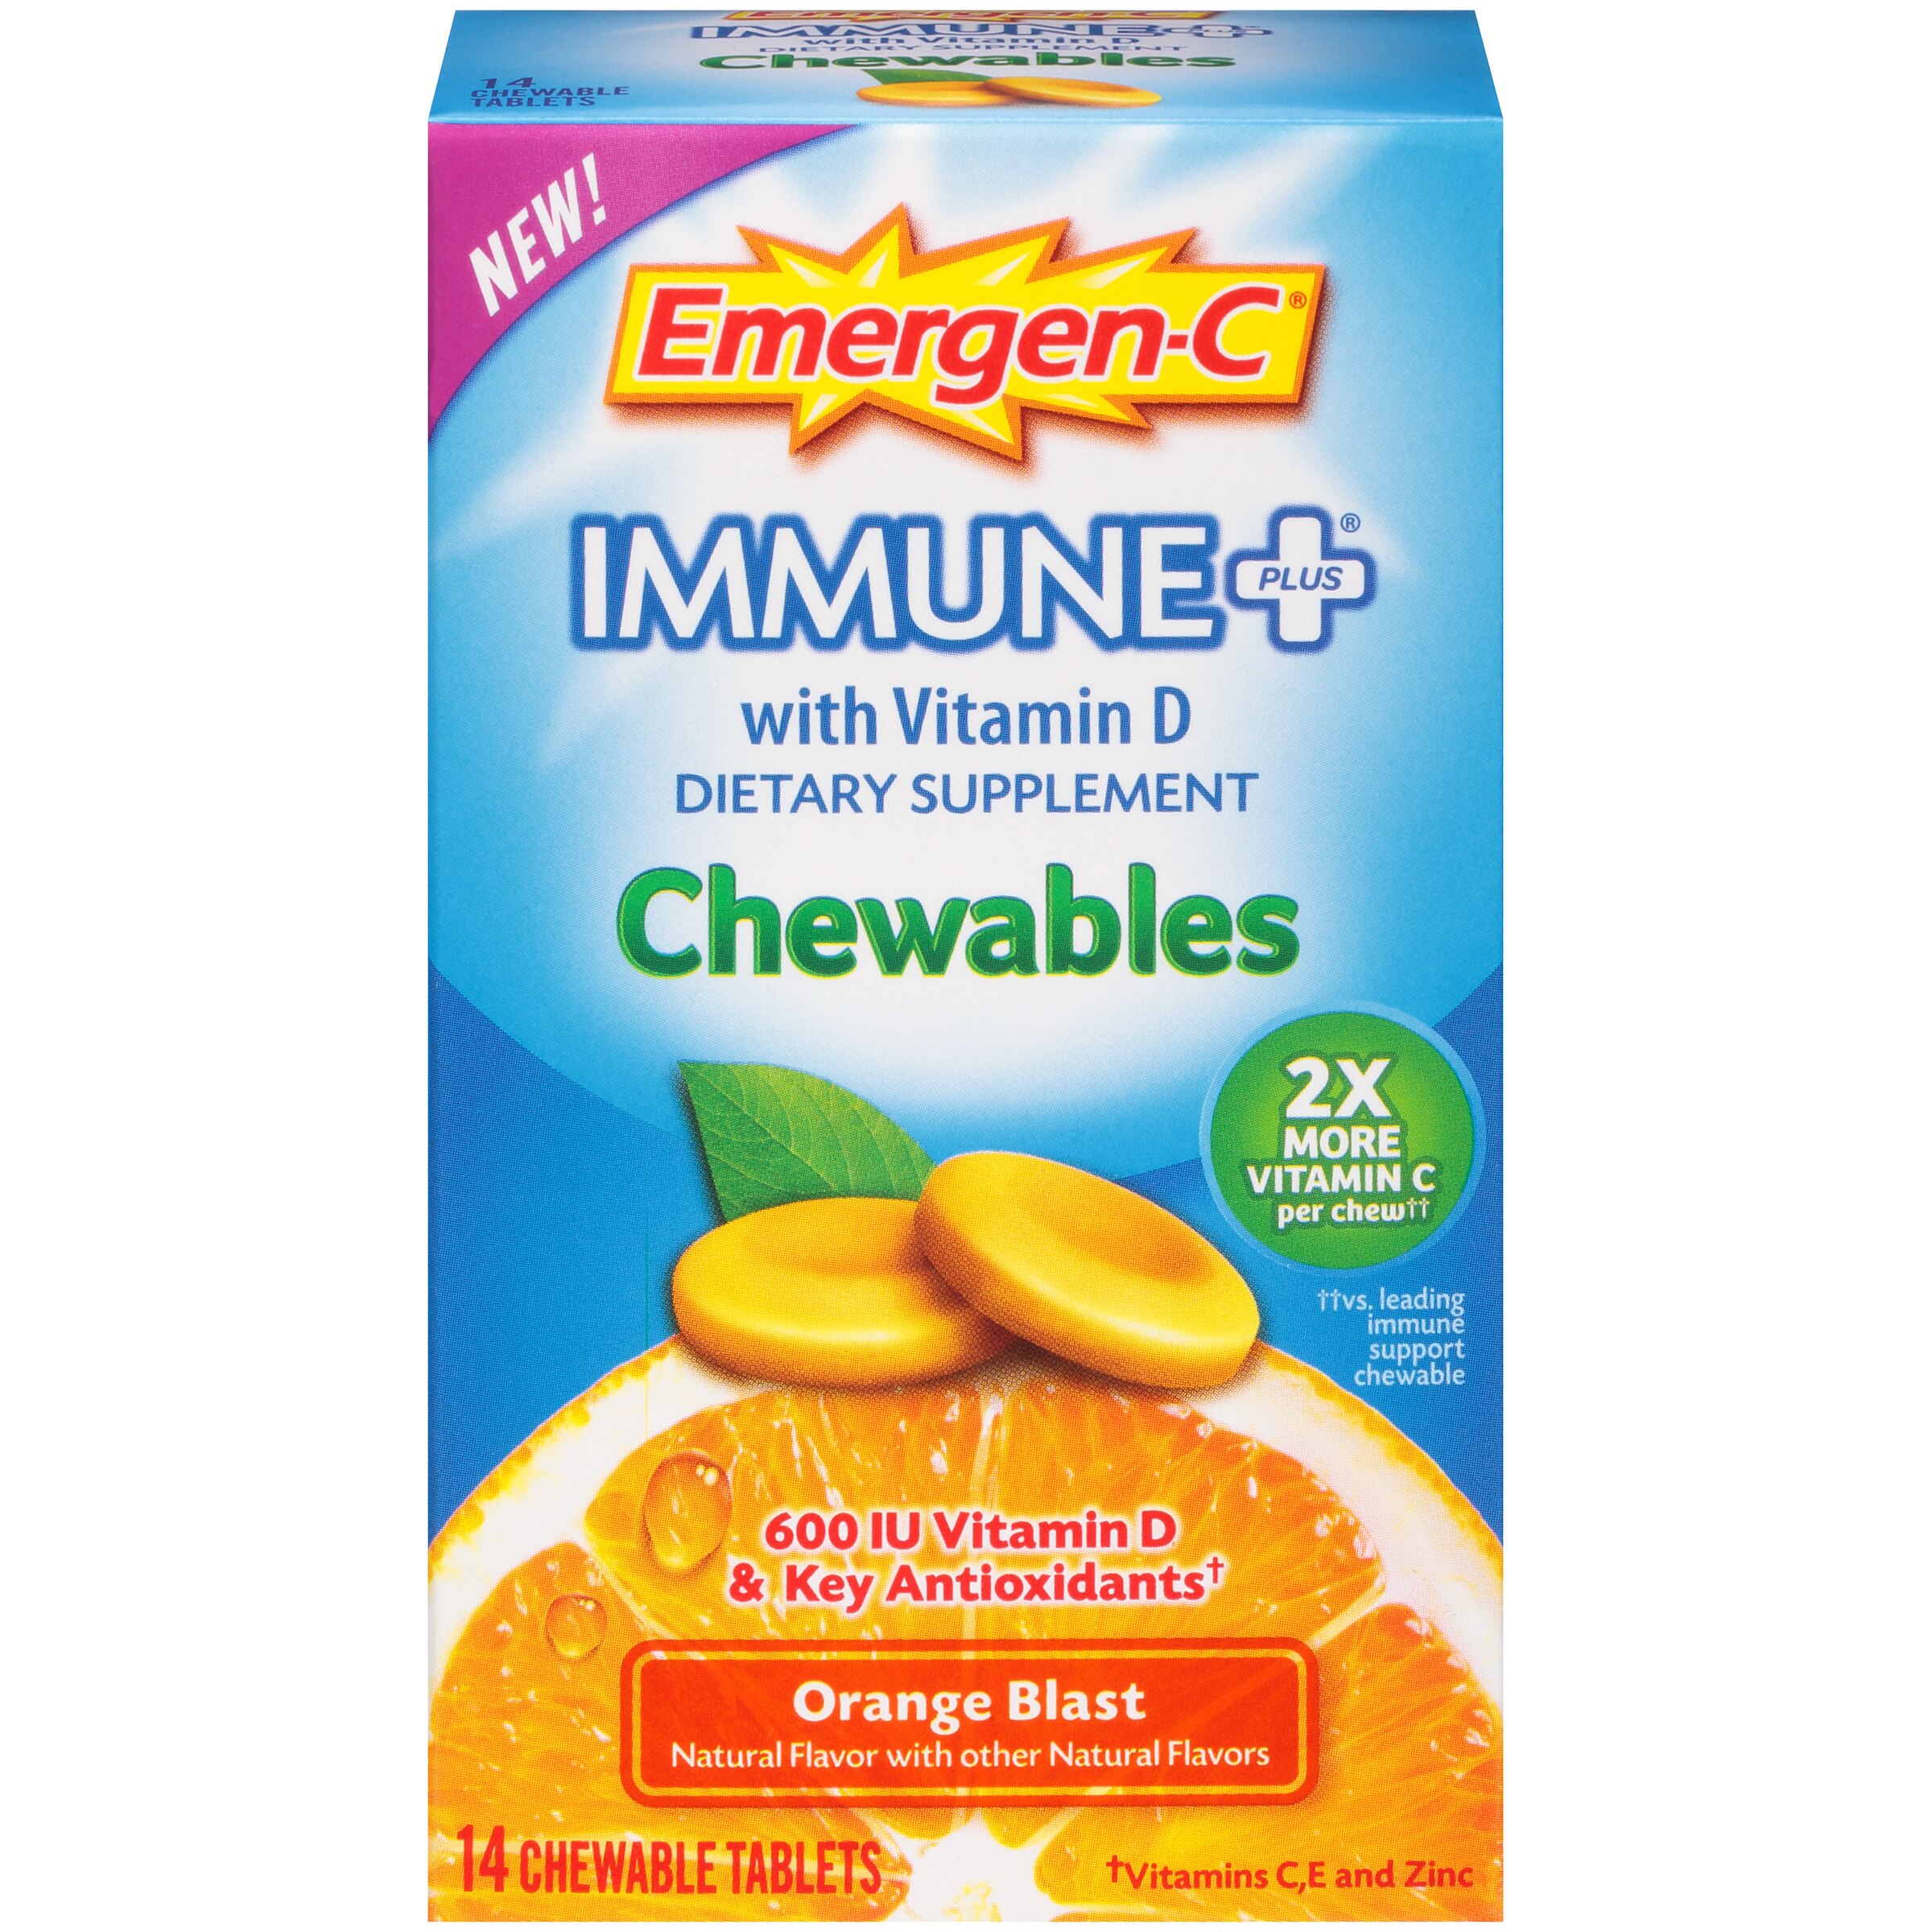 Emergen-C Immune+ with Vitamin D Chewable Tablets, 14 CT